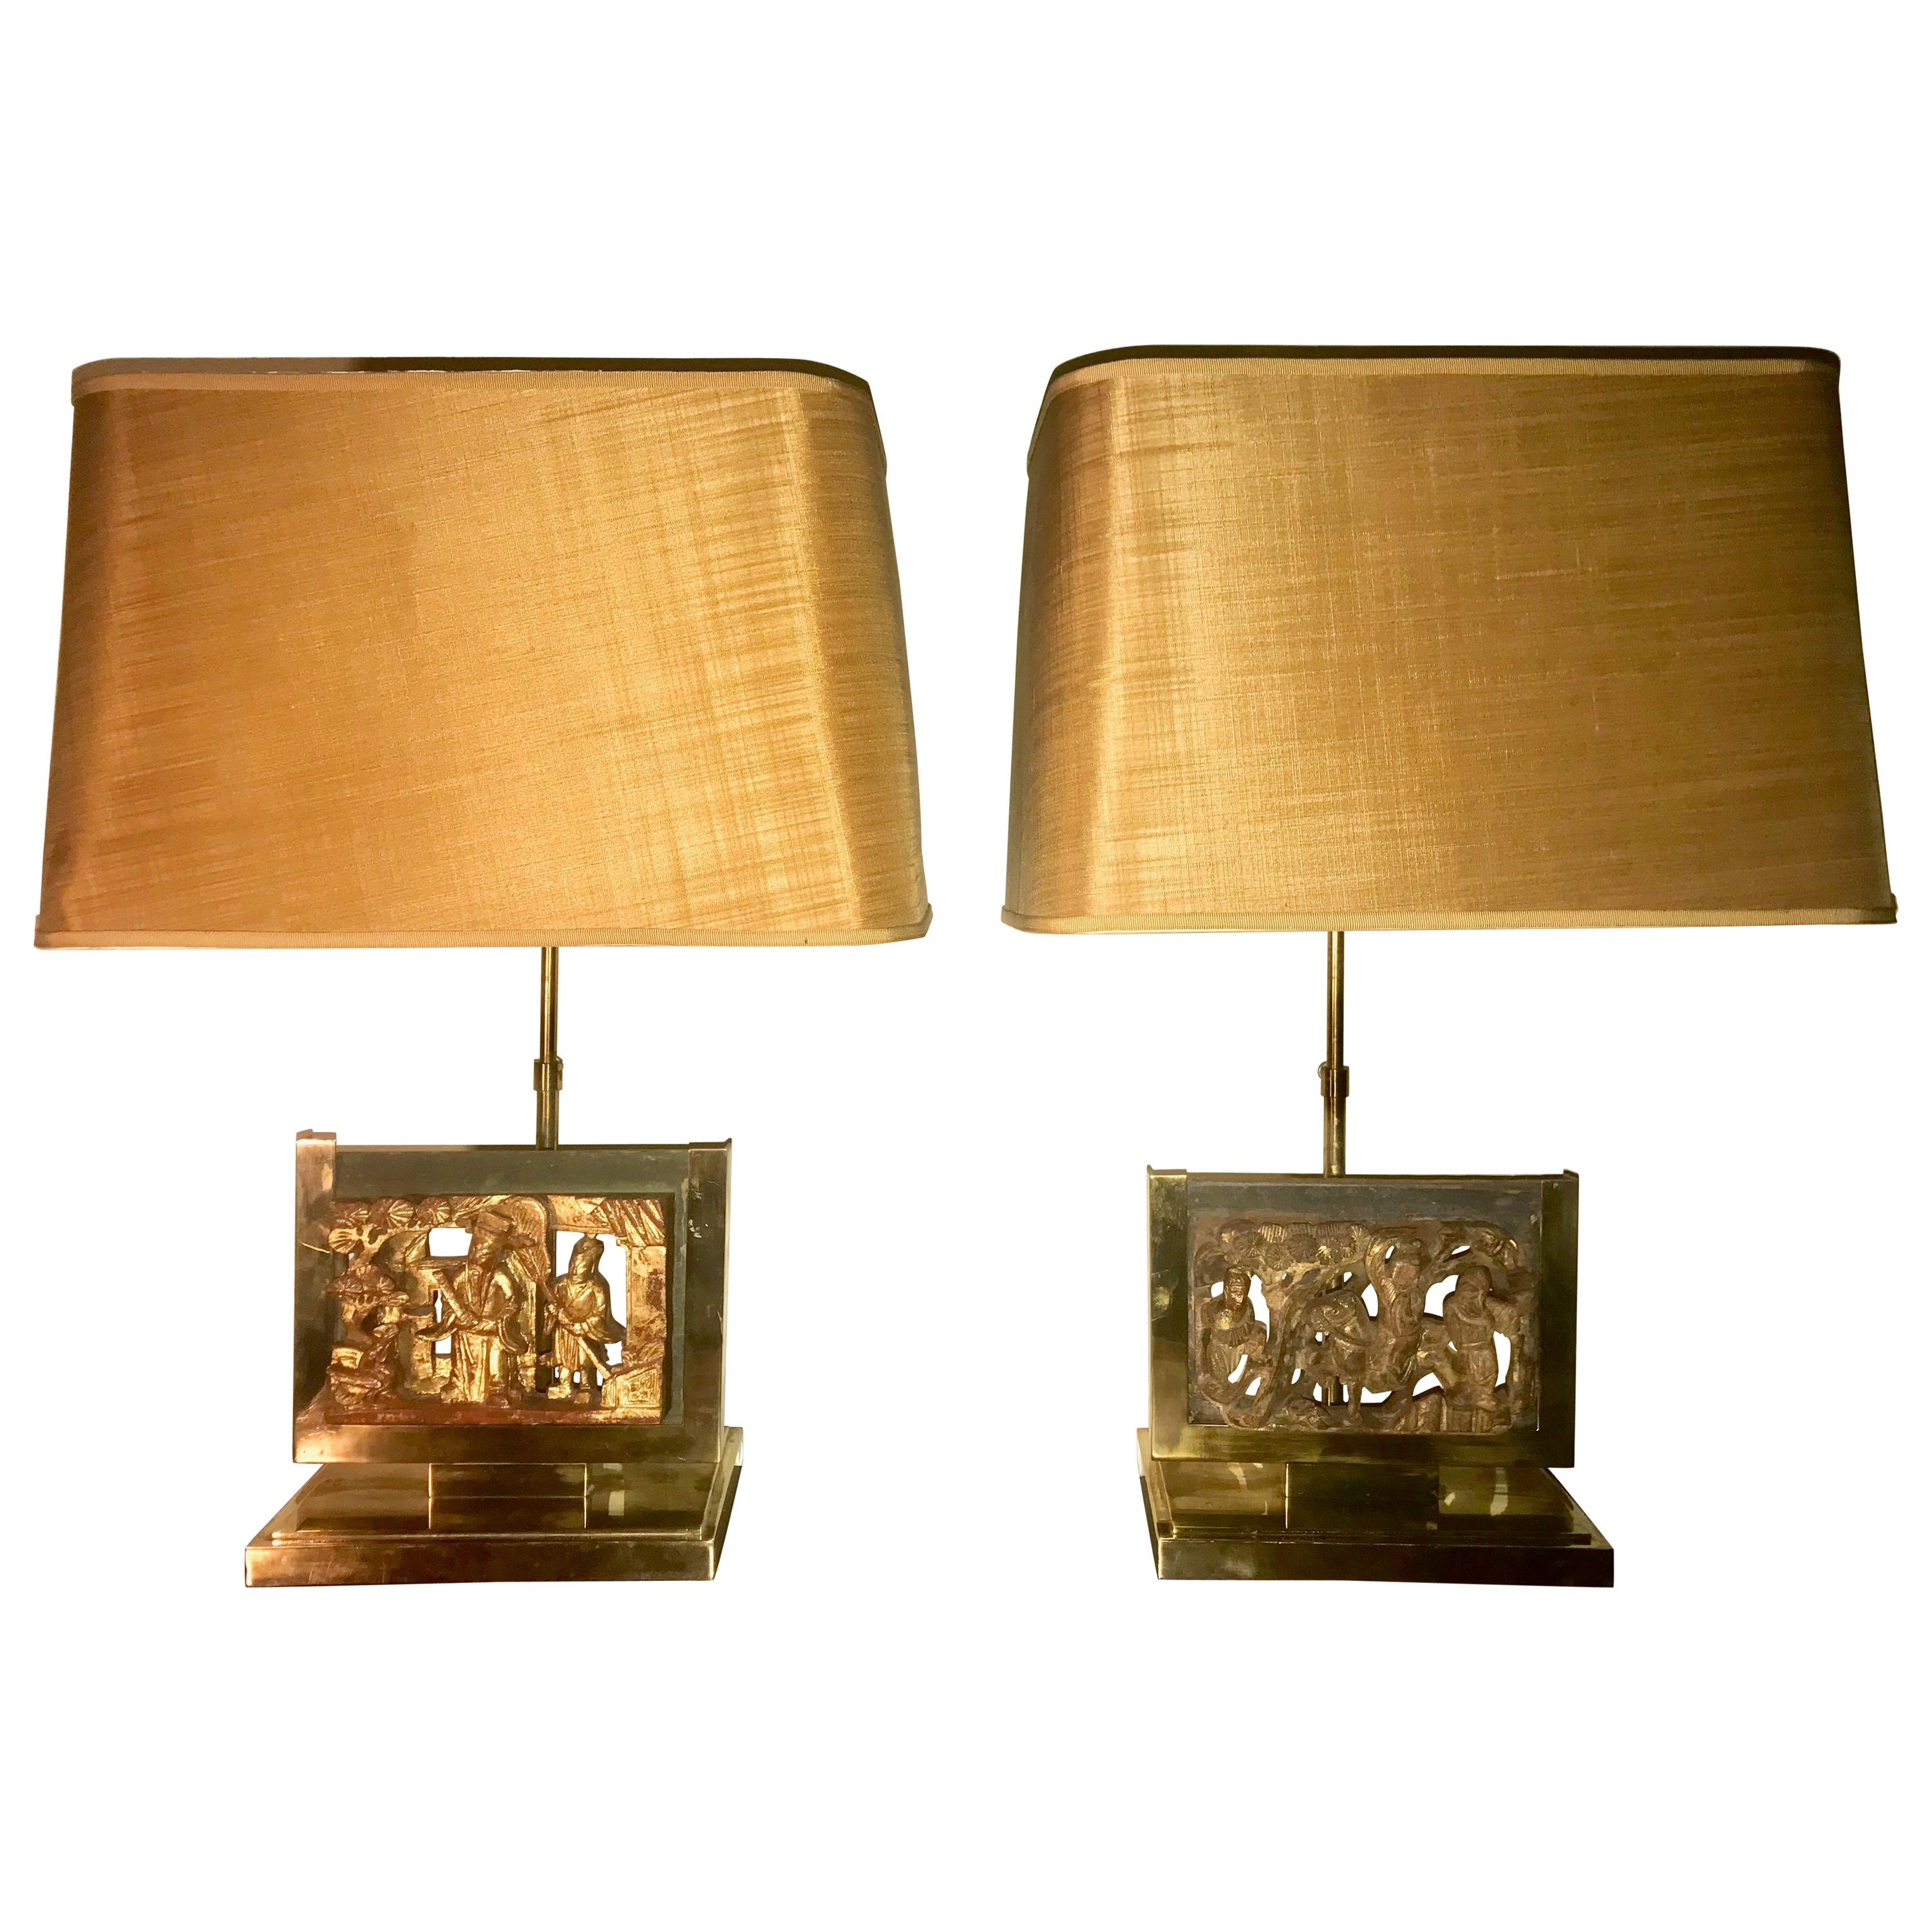 Pair of Midcentury Mod Brass Lamps with 19th Century Chinese Carved Wood Panels